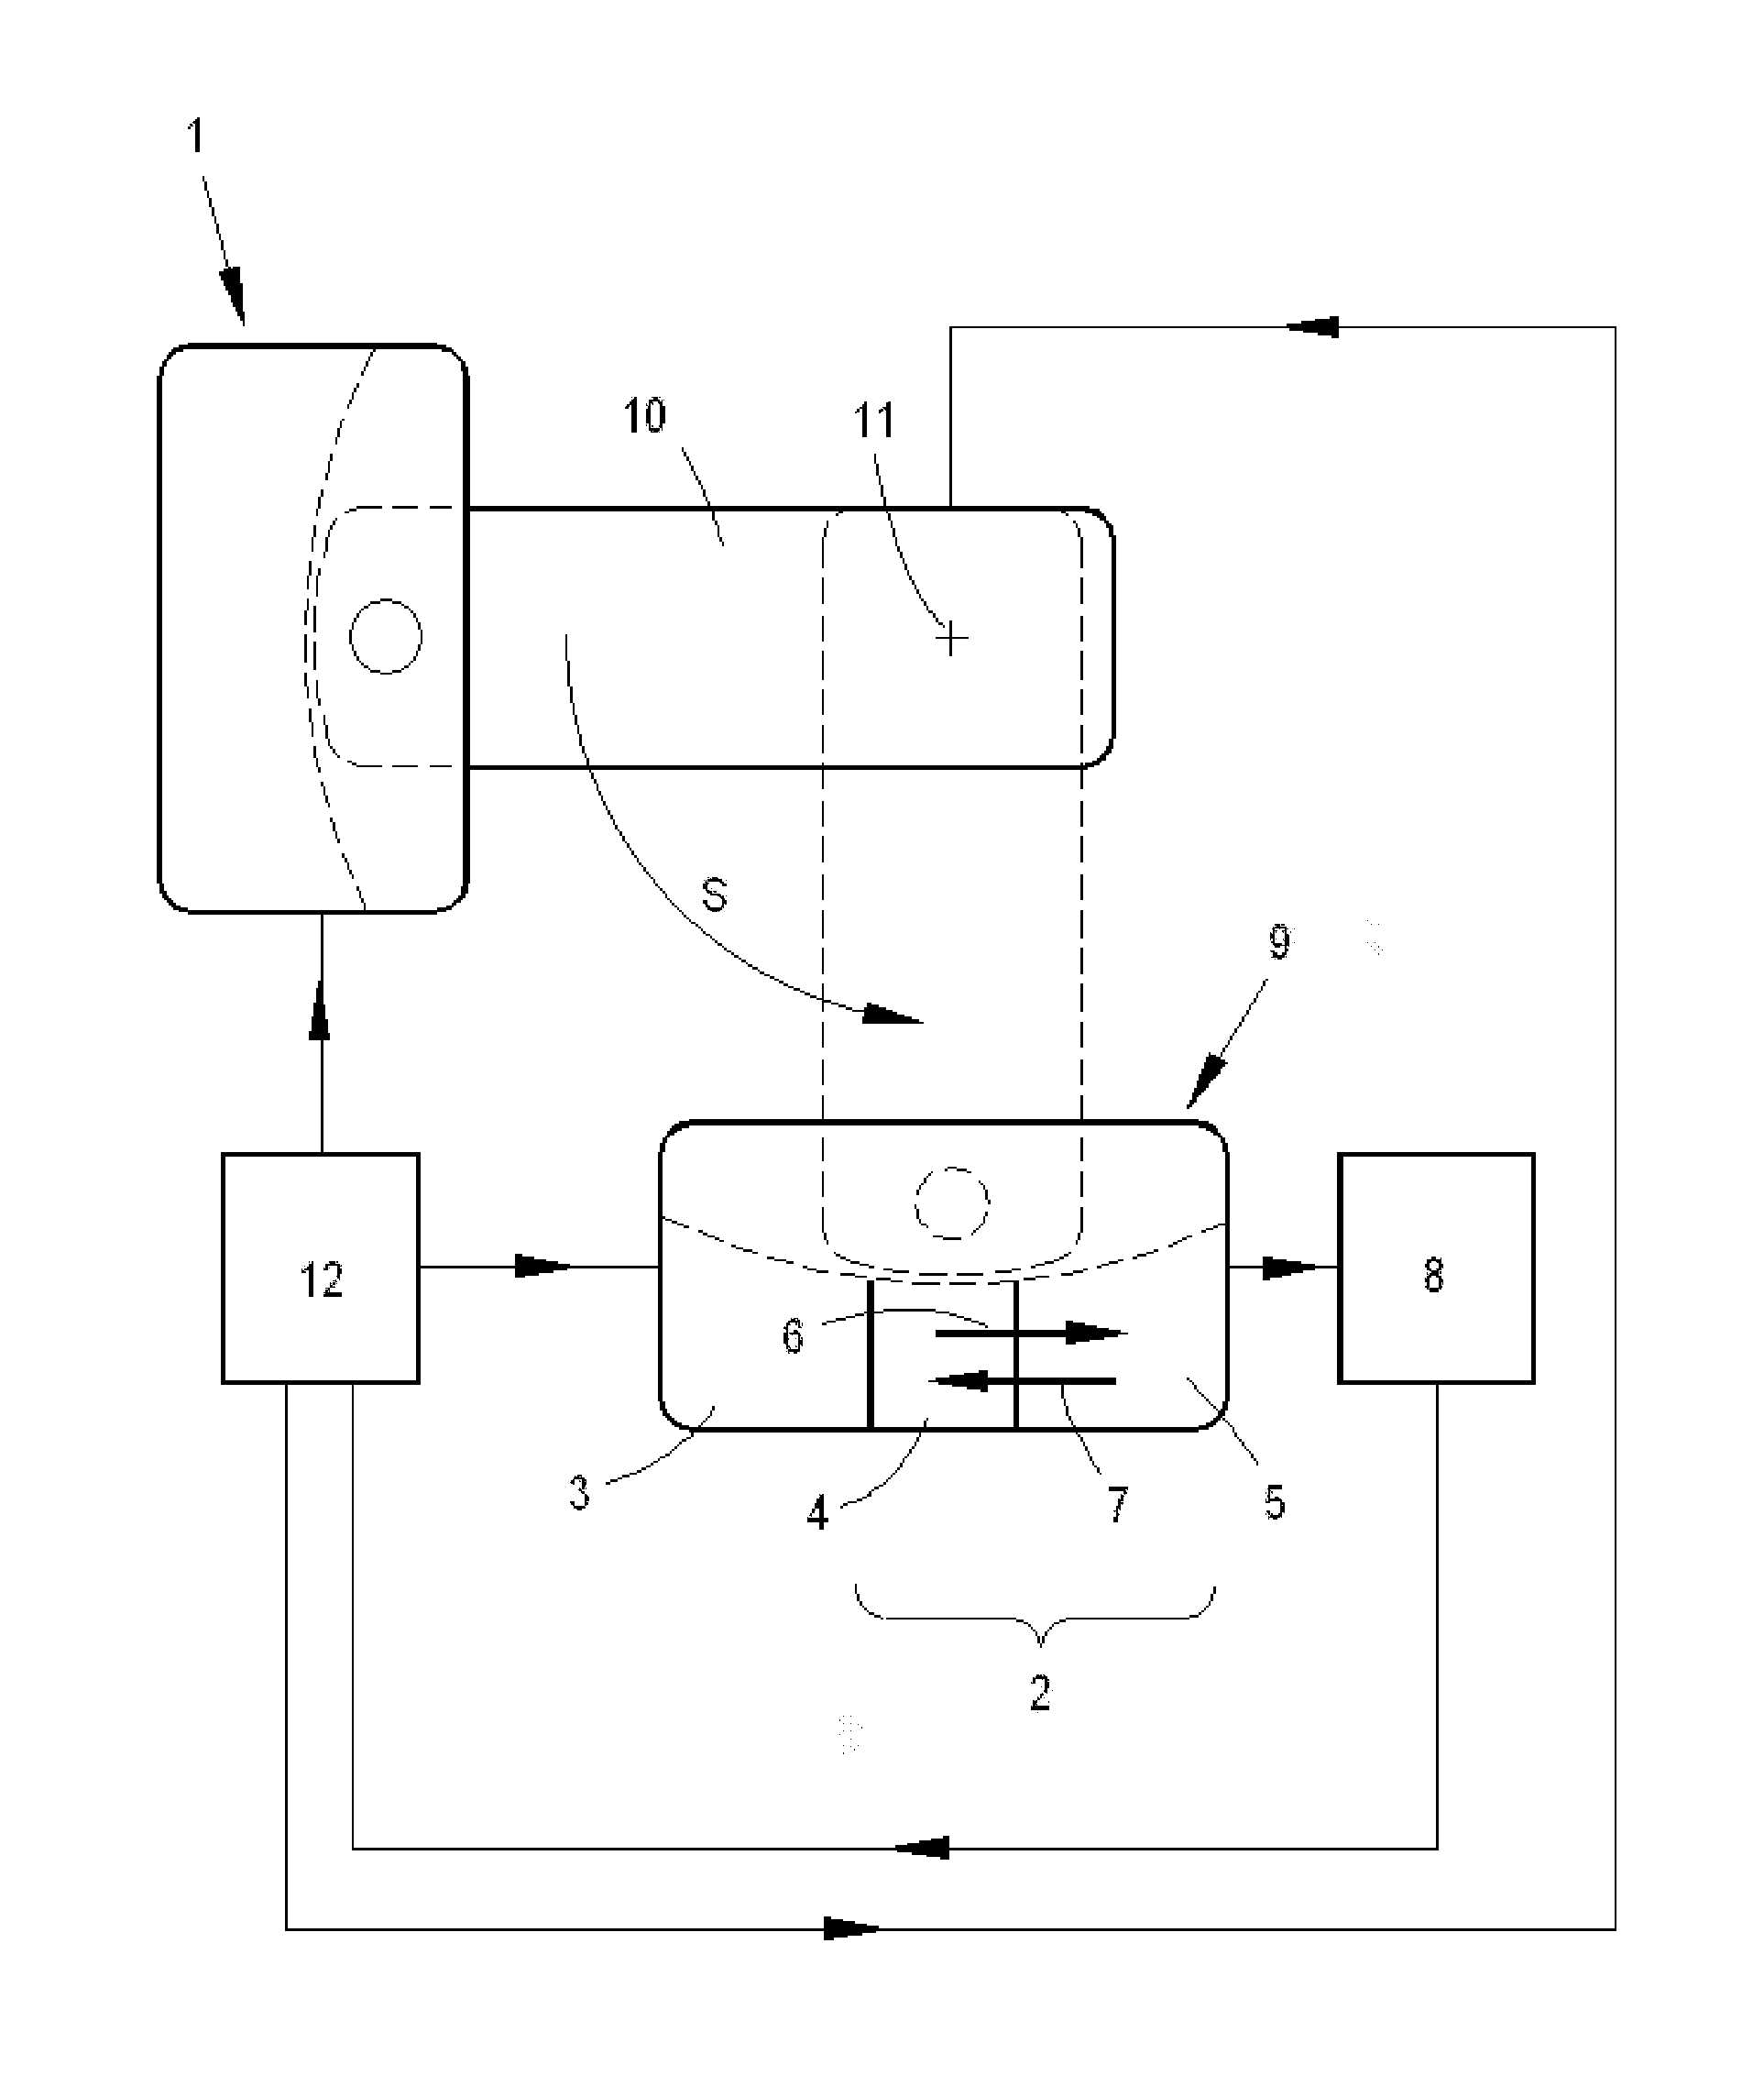 Instrument system and procedure for phacoemulsification